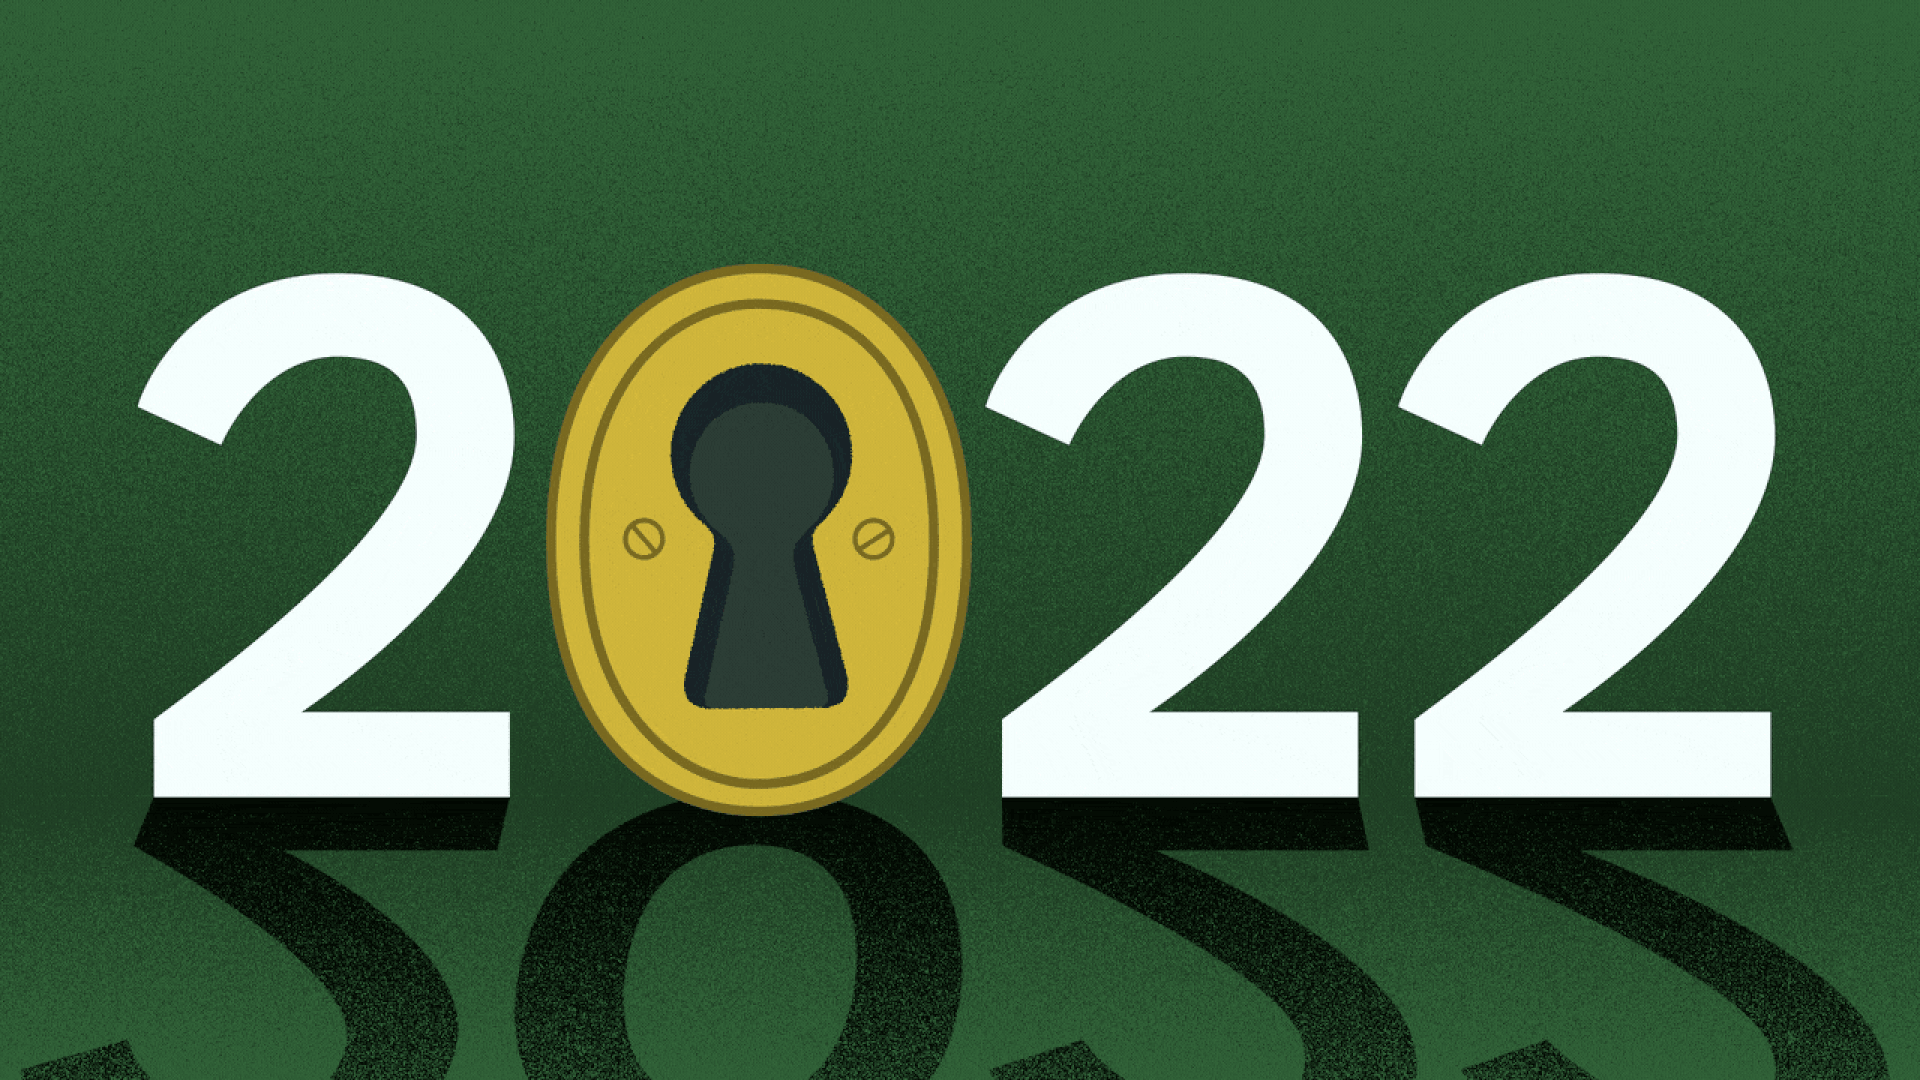 graphic of 2022 becoming 2023 with a keyhole as the "0"